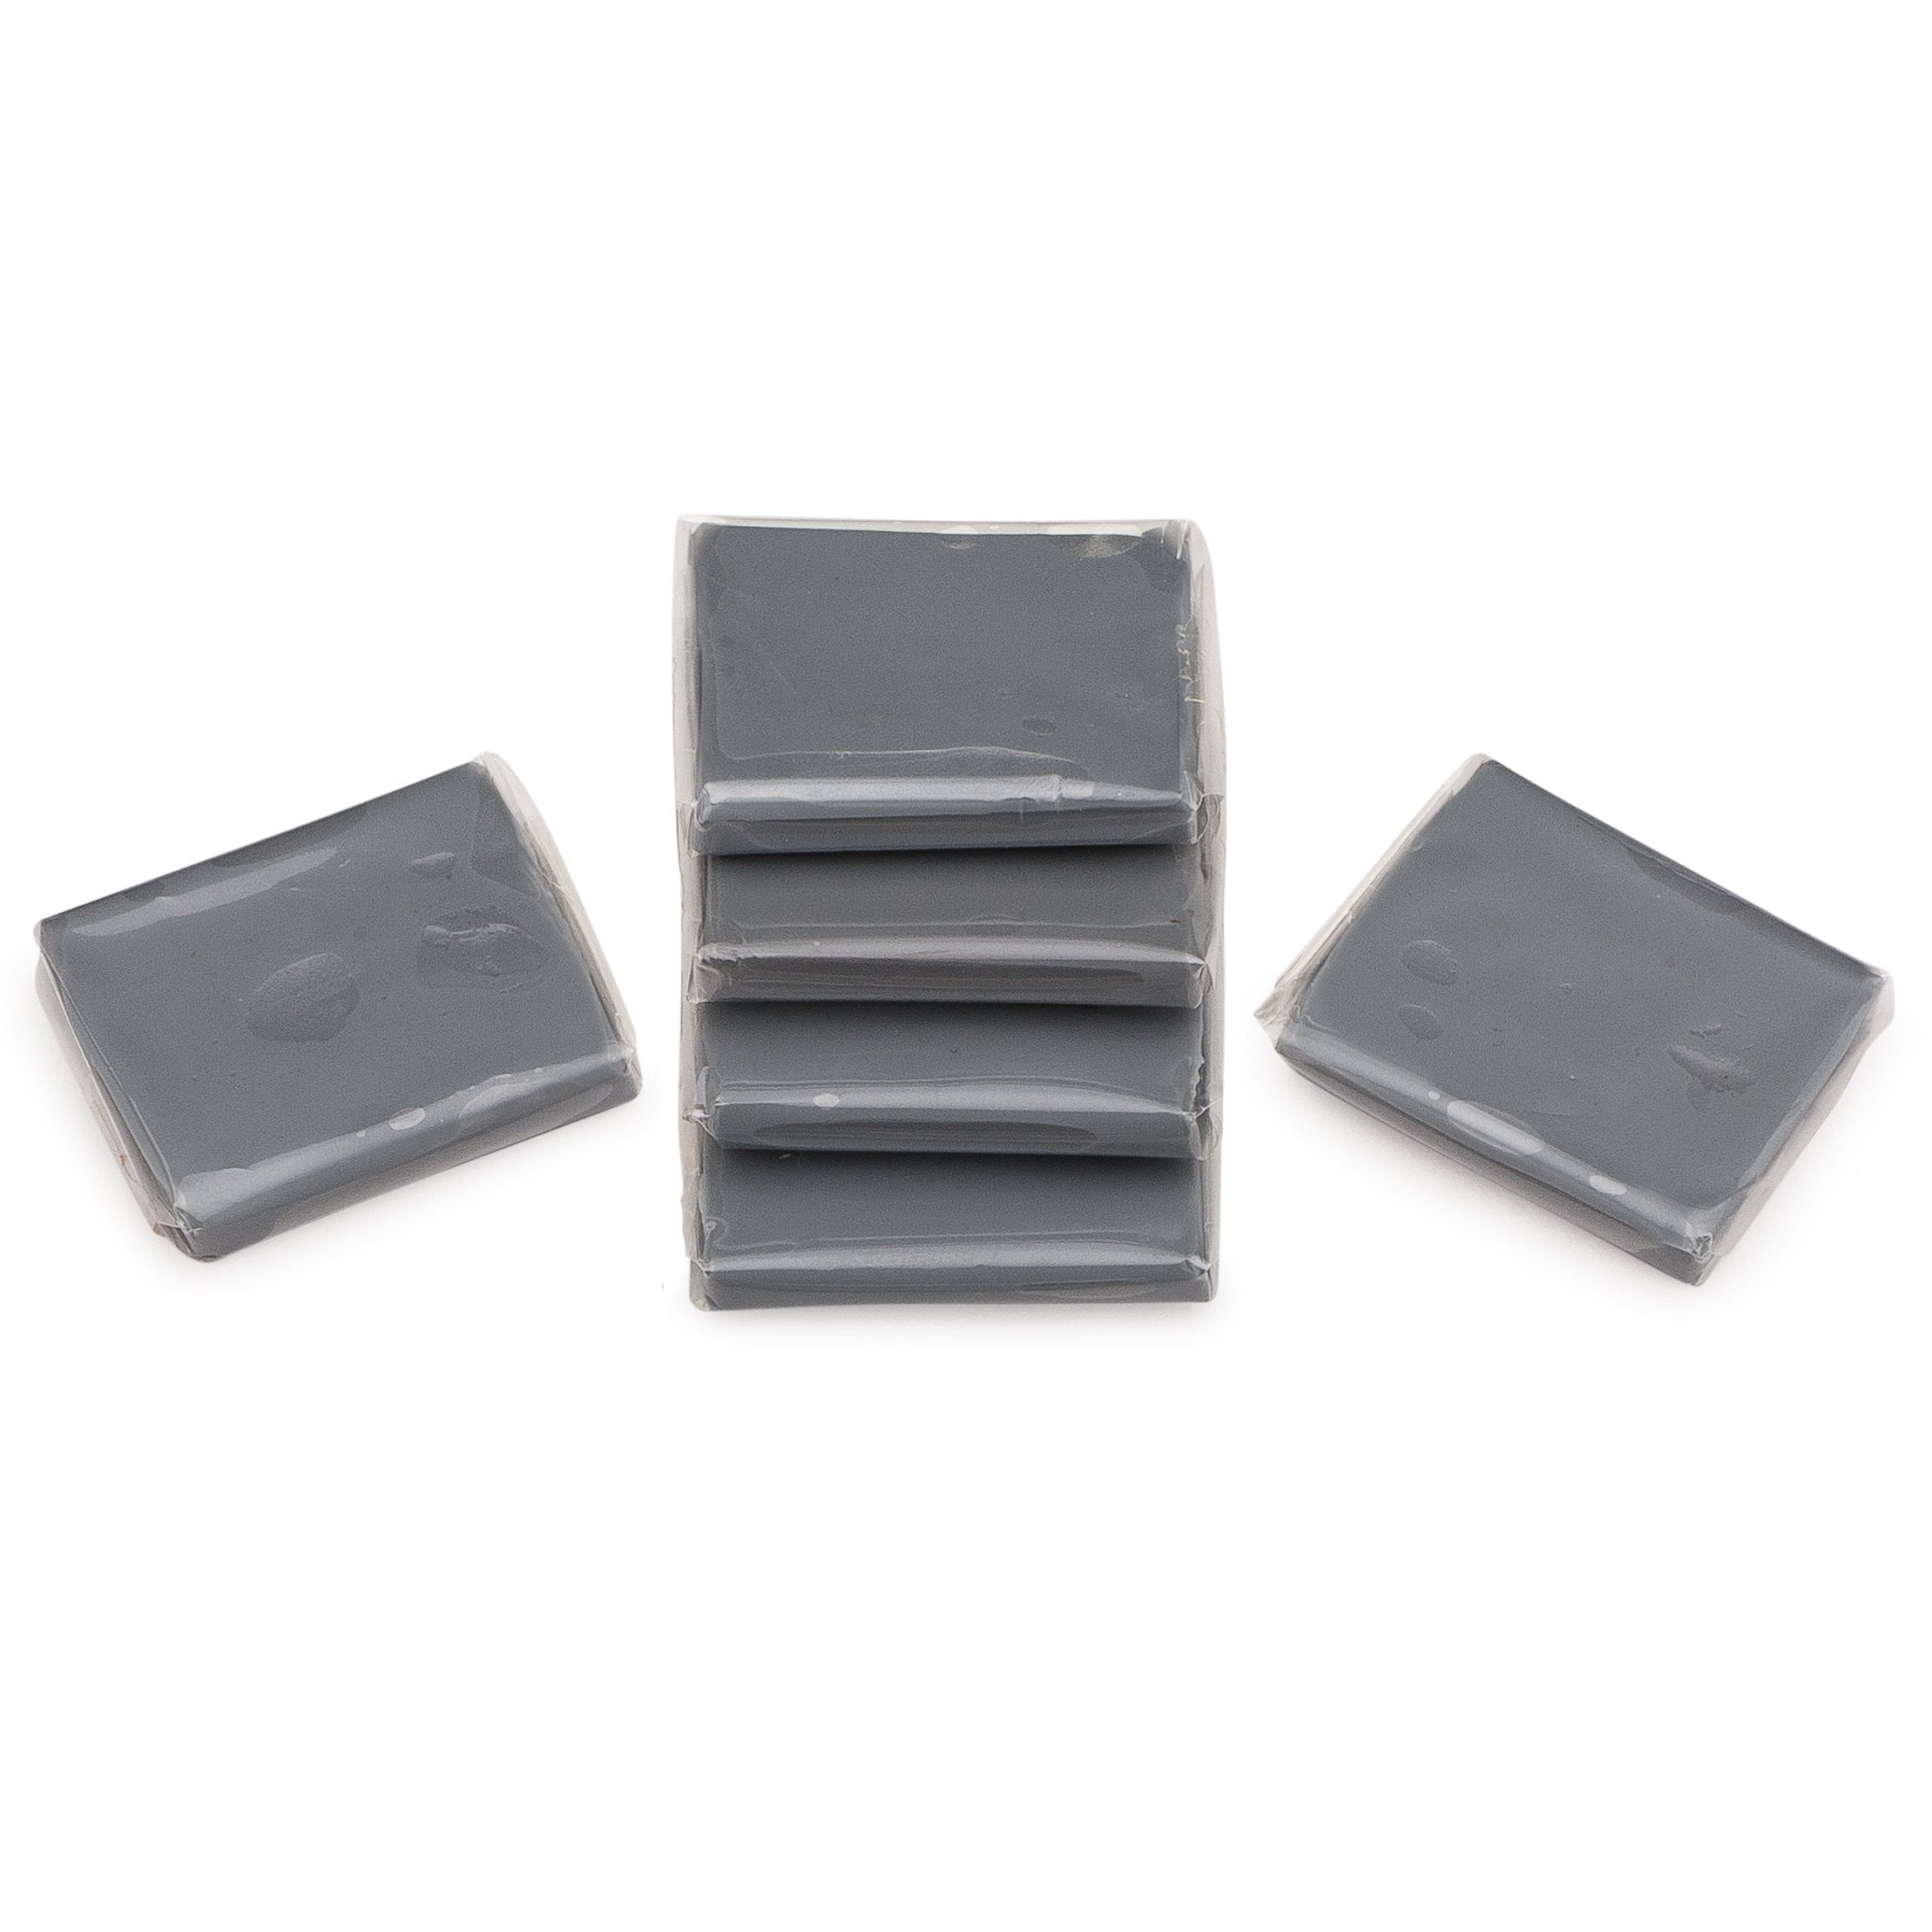 June Gold Kneaded Rubber Erasers Gray 18 Pack - Blend Shade Smooth Correct  and Brighten Your Sketches and Drawings